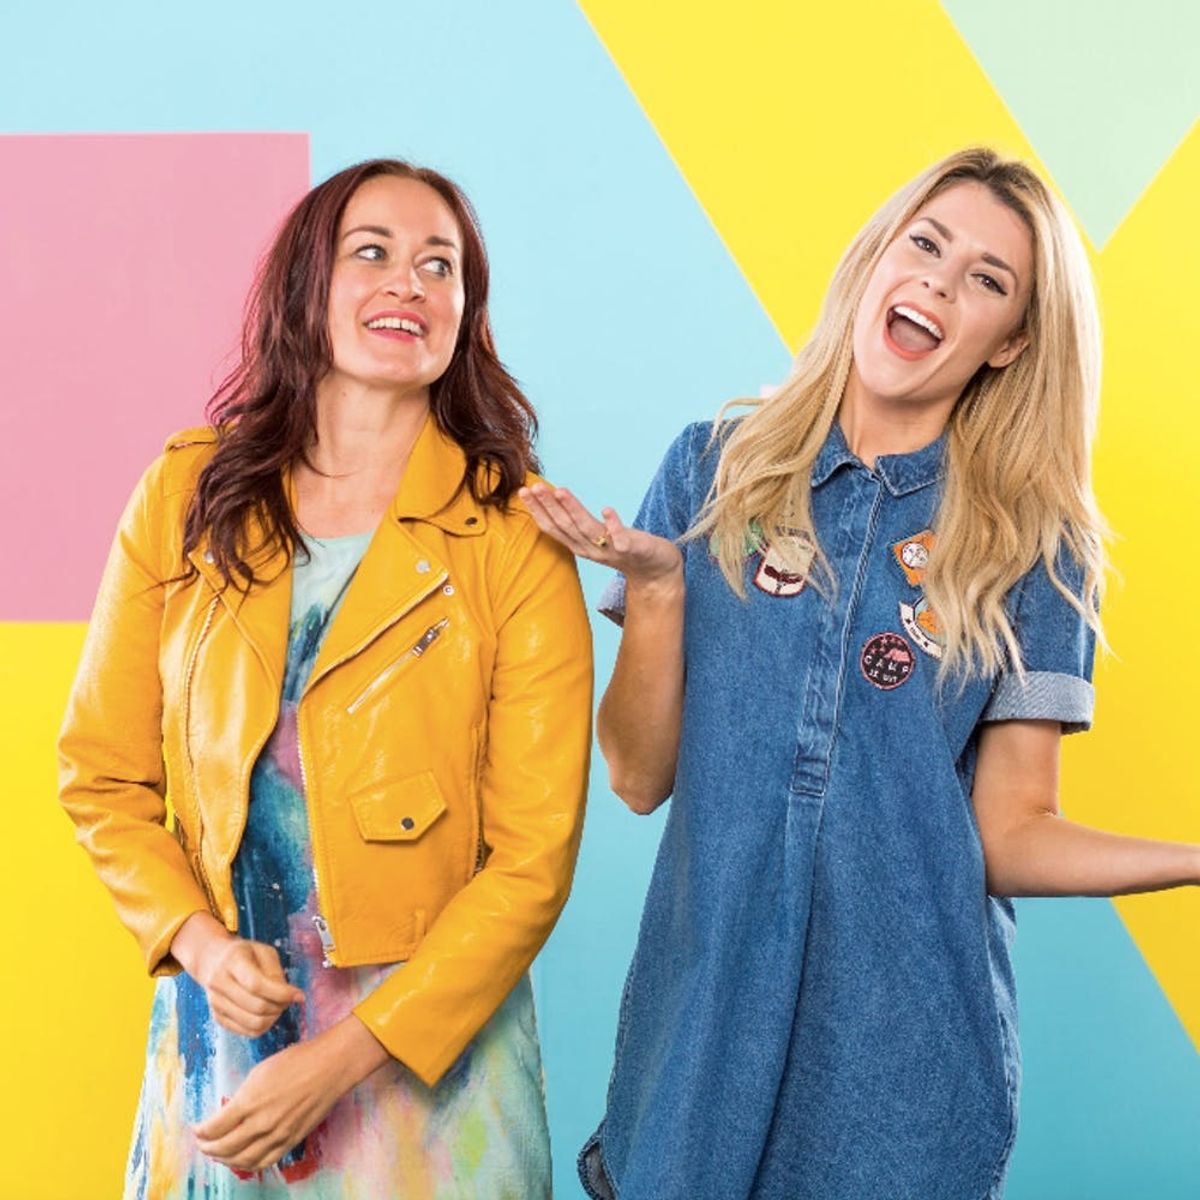 Mamrie Hart + Grace Helbig’s Share 5 Simple Rules for Slaying at Life at Re:Make 2016